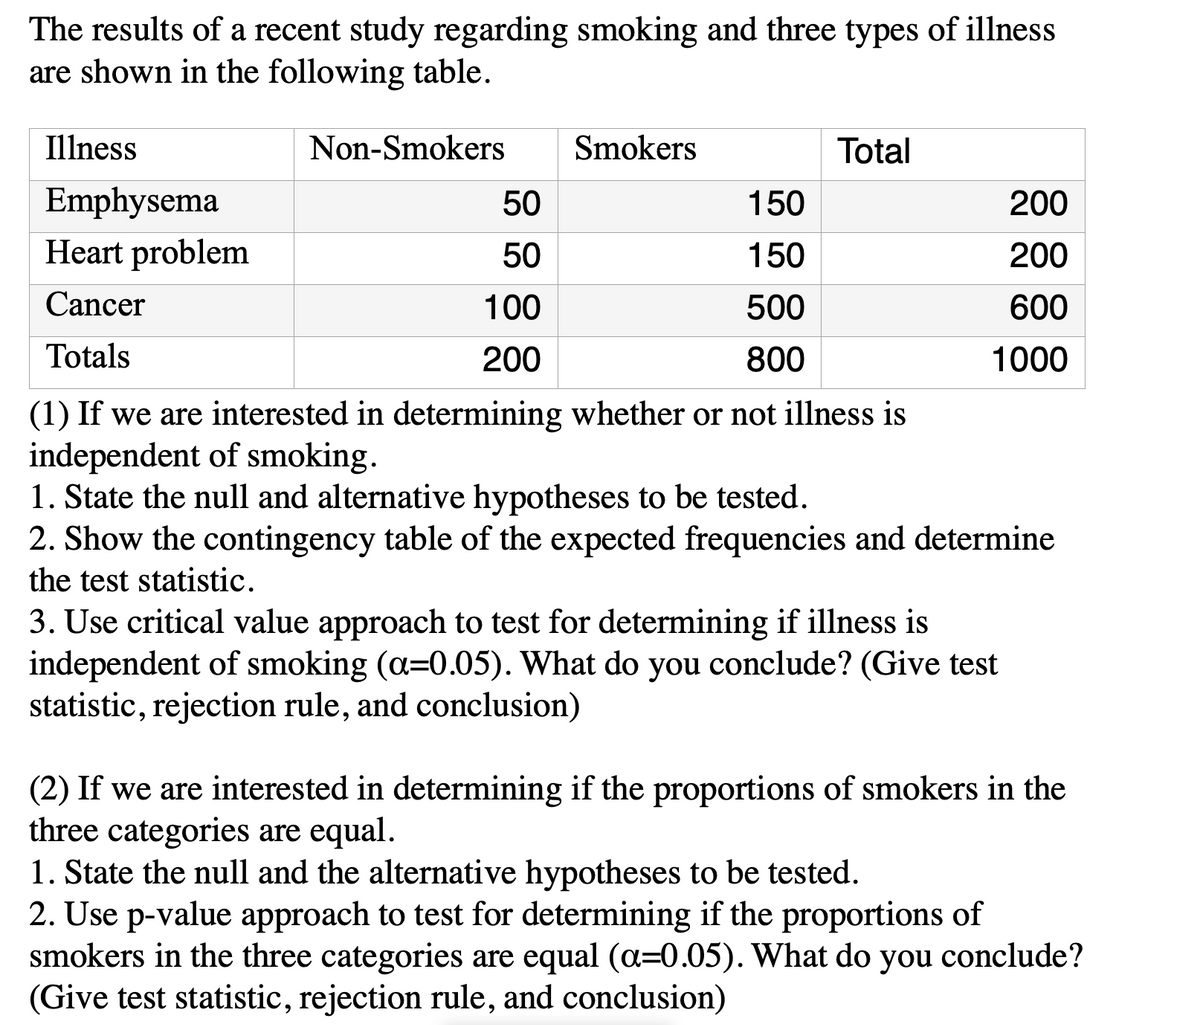 The results of a recent study regarding smoking and three types of illness
are shown in the following table.
Illness
Non-Smokers
Smokers
Total
Emphysema
50
150
200
Heart problem
50
150
200
Cancer
100
500
600
Totals
200
800
1000
(1) If we are interested in determining whether or not illness is
independent of smoking.
1. State the null and alternative hypotheses to be tested.
2. Show the contingency table of the expected frequencies and determine
the test statistic.
3. Use critical value approach to test for determining if illness is
independent of smoking (a=0.05). What do you conclude? (Give test
statistic, rejection rule, and conclusion)
(2) If we are interested in determining if the proportions of smokers in the
three categories are equal.
1. State the null and the alternative hypotheses to be tested.
2. Use p-value approach to test for determining if the proportions of
smokers in the three categories are equal (a=0.05). What do you conclude?
(Give test statistic, rejection rule, and conclusion)